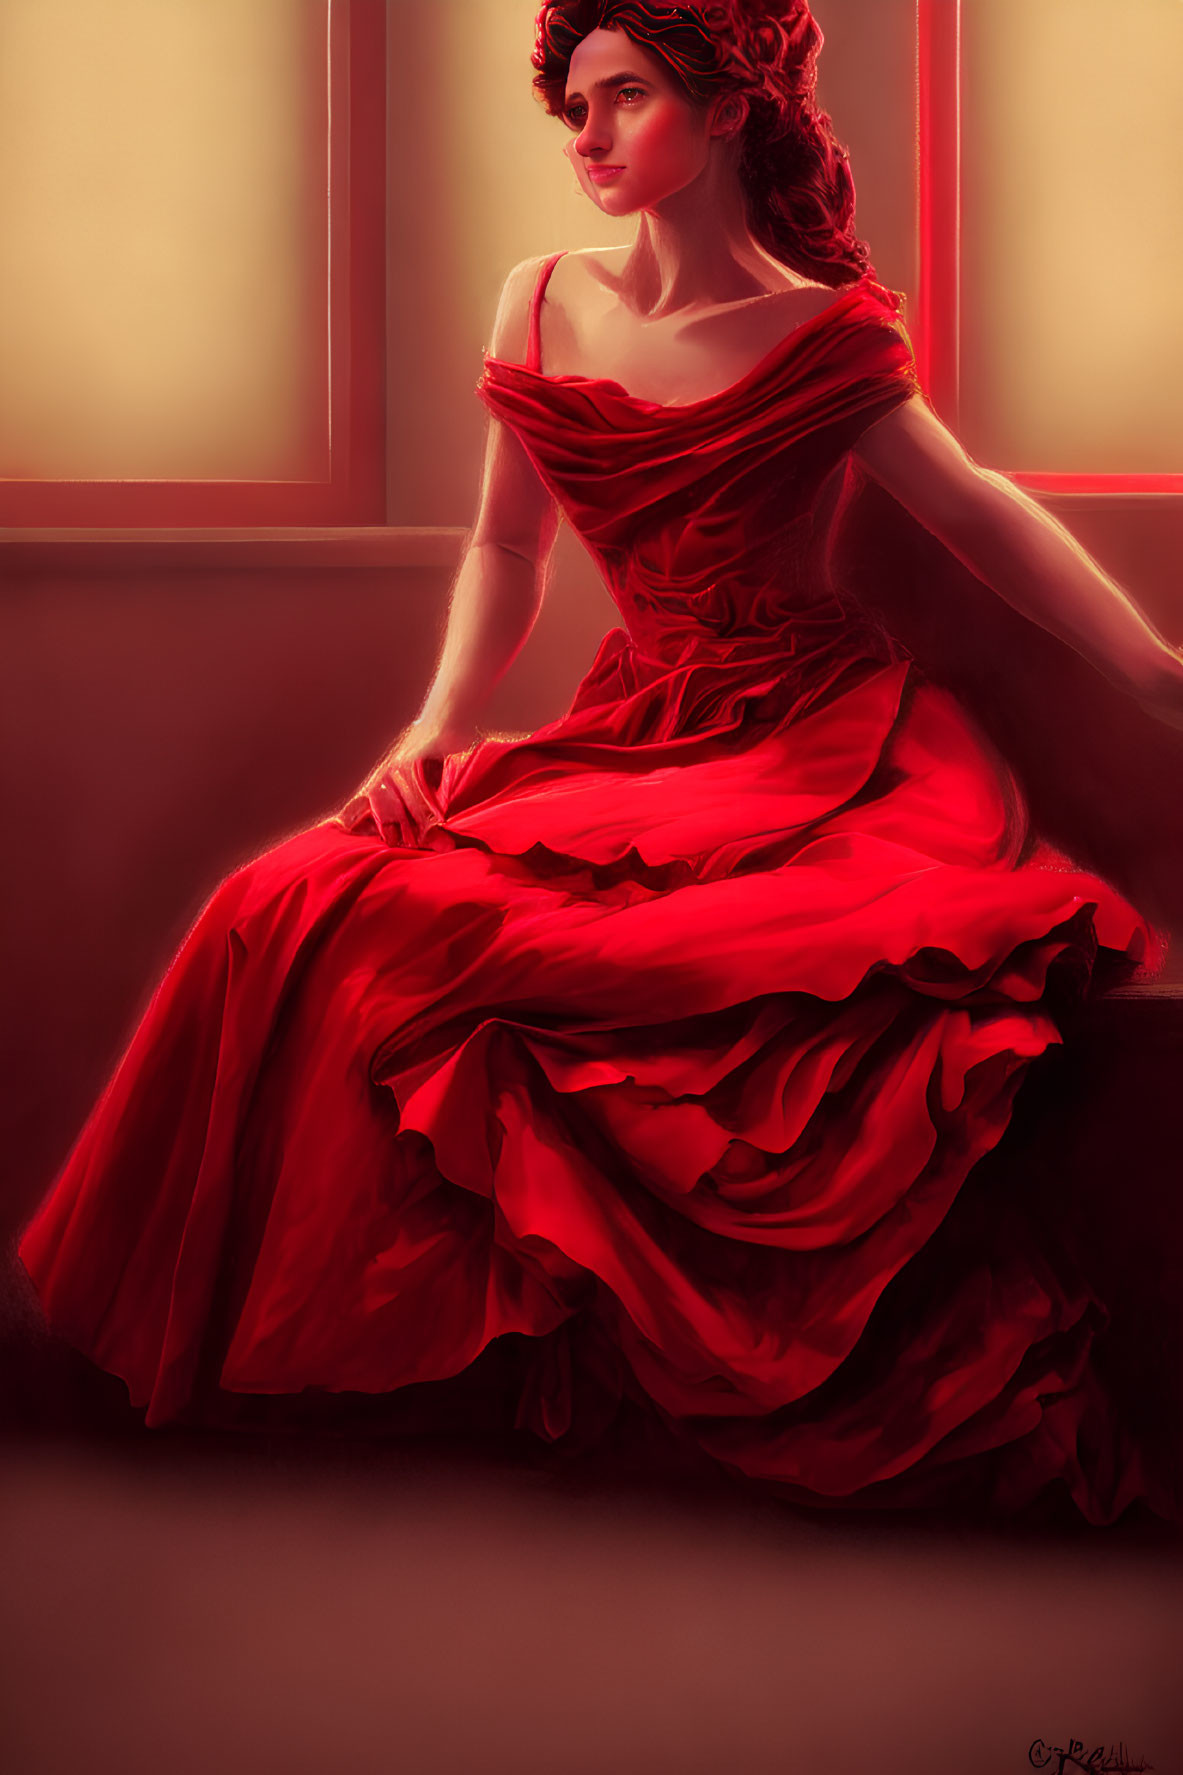 Woman in Red Dress with Ruffled Details Sitting by Window